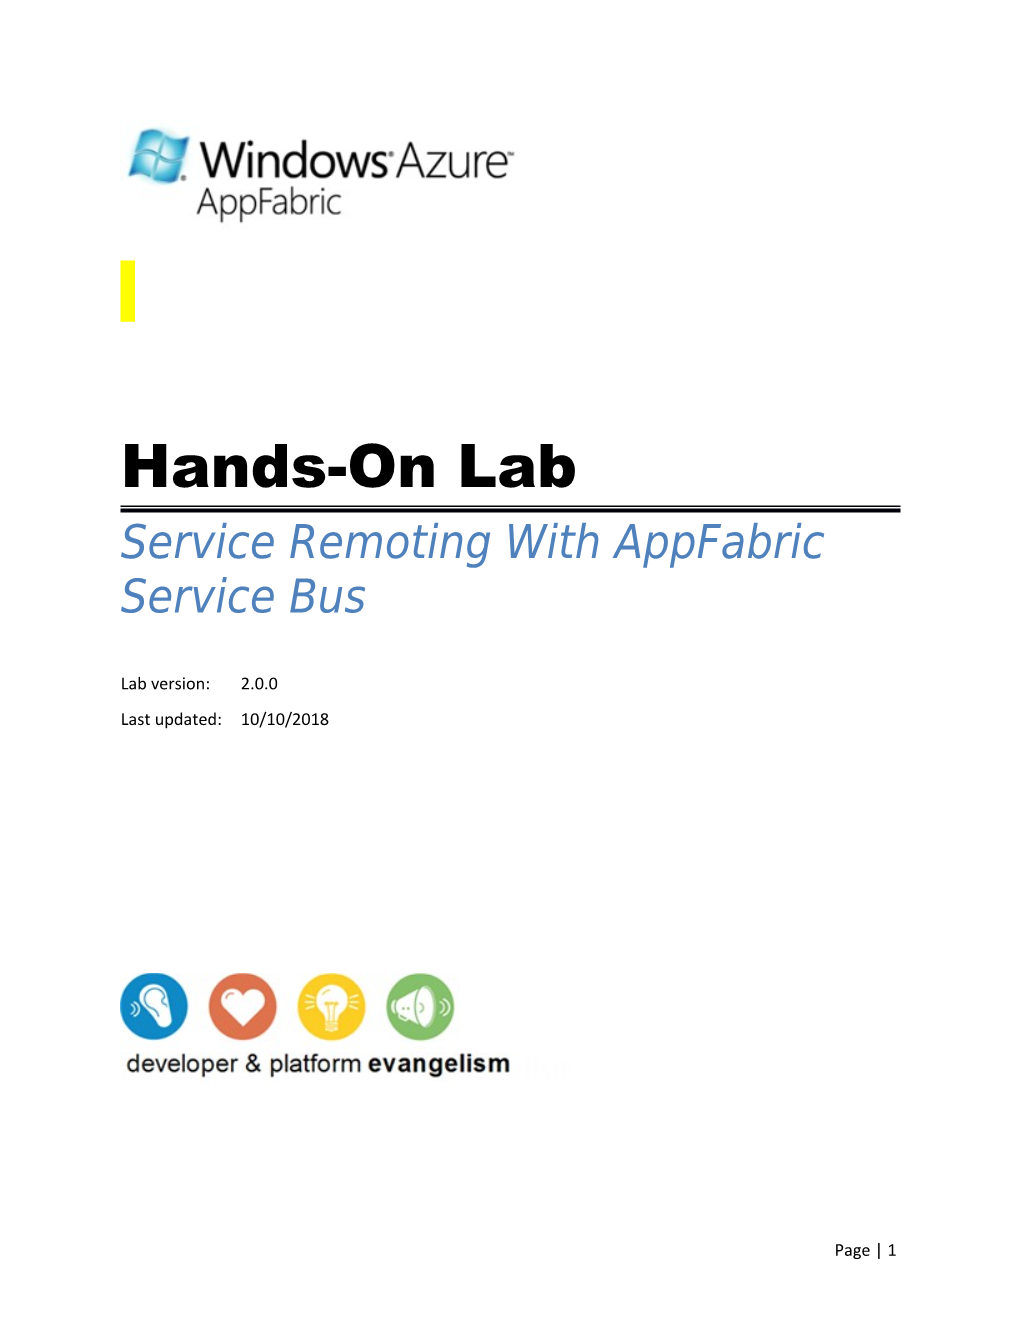 Service Remoting with Appfabric Service Bus